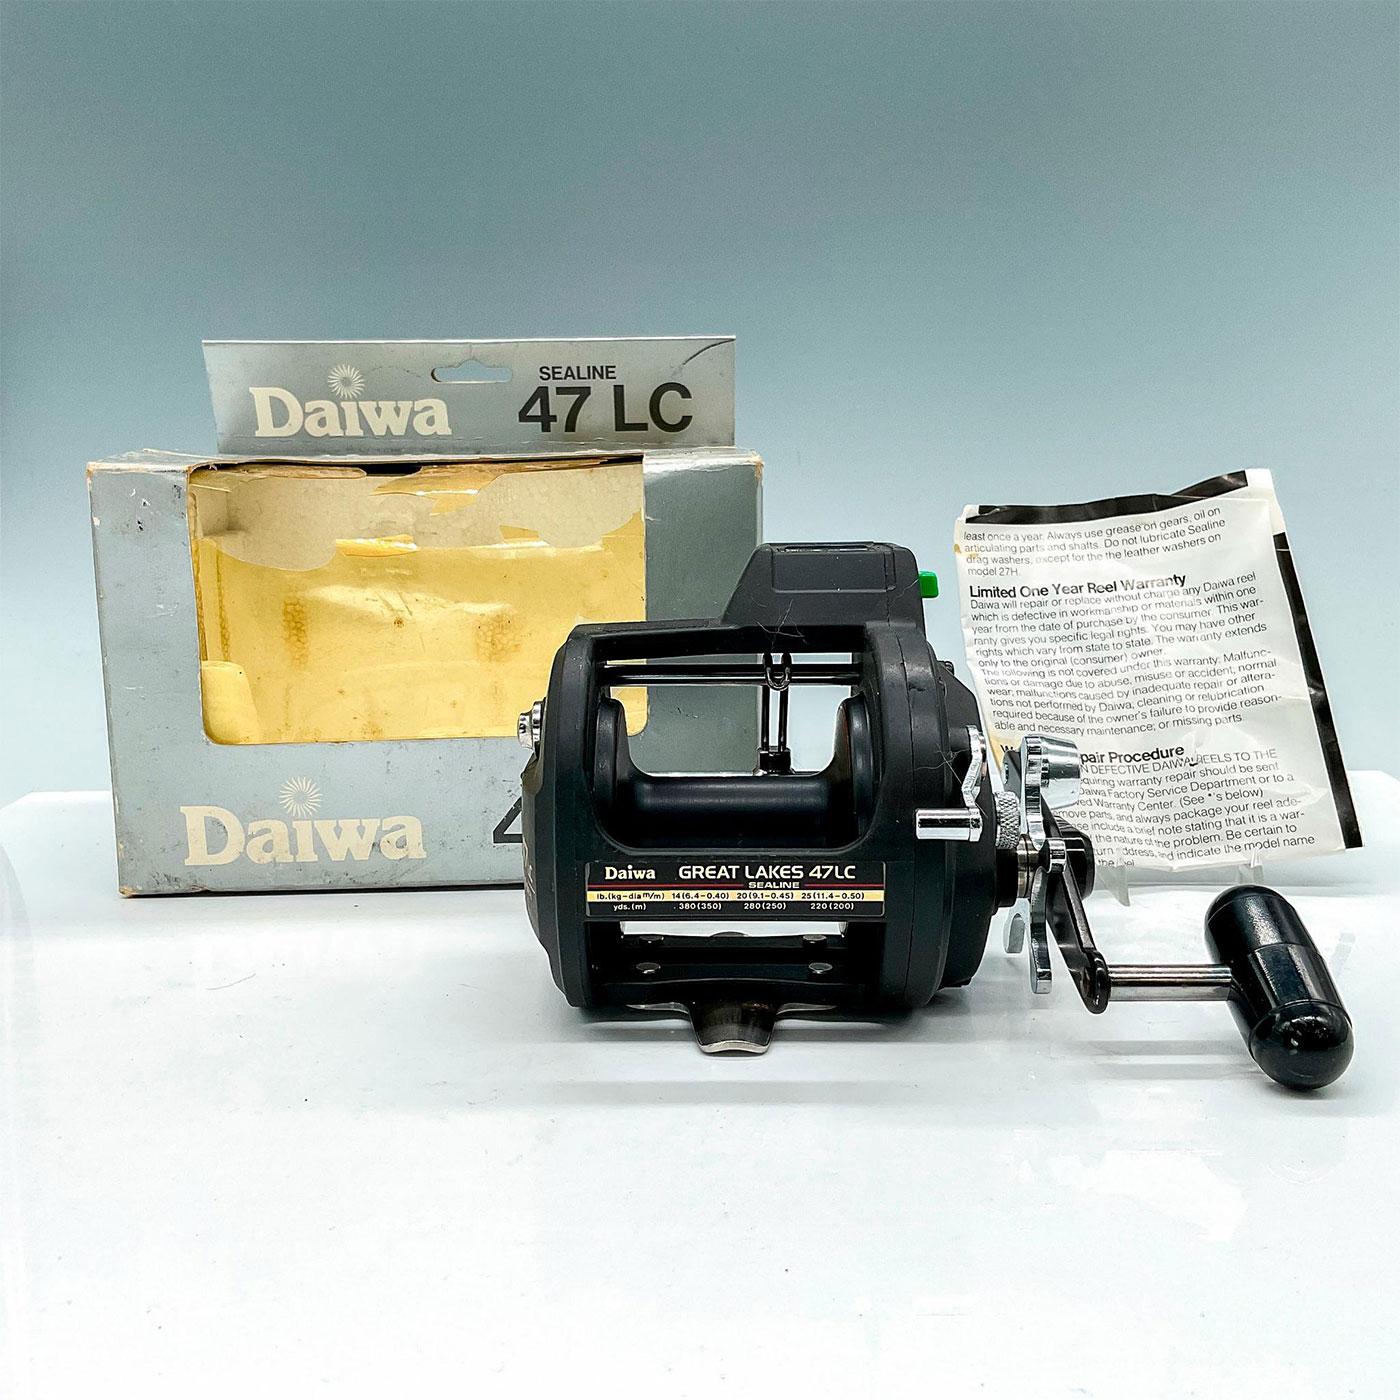 Daiwa Great Lakes 47 LC Sealine Reel In Box with Papers